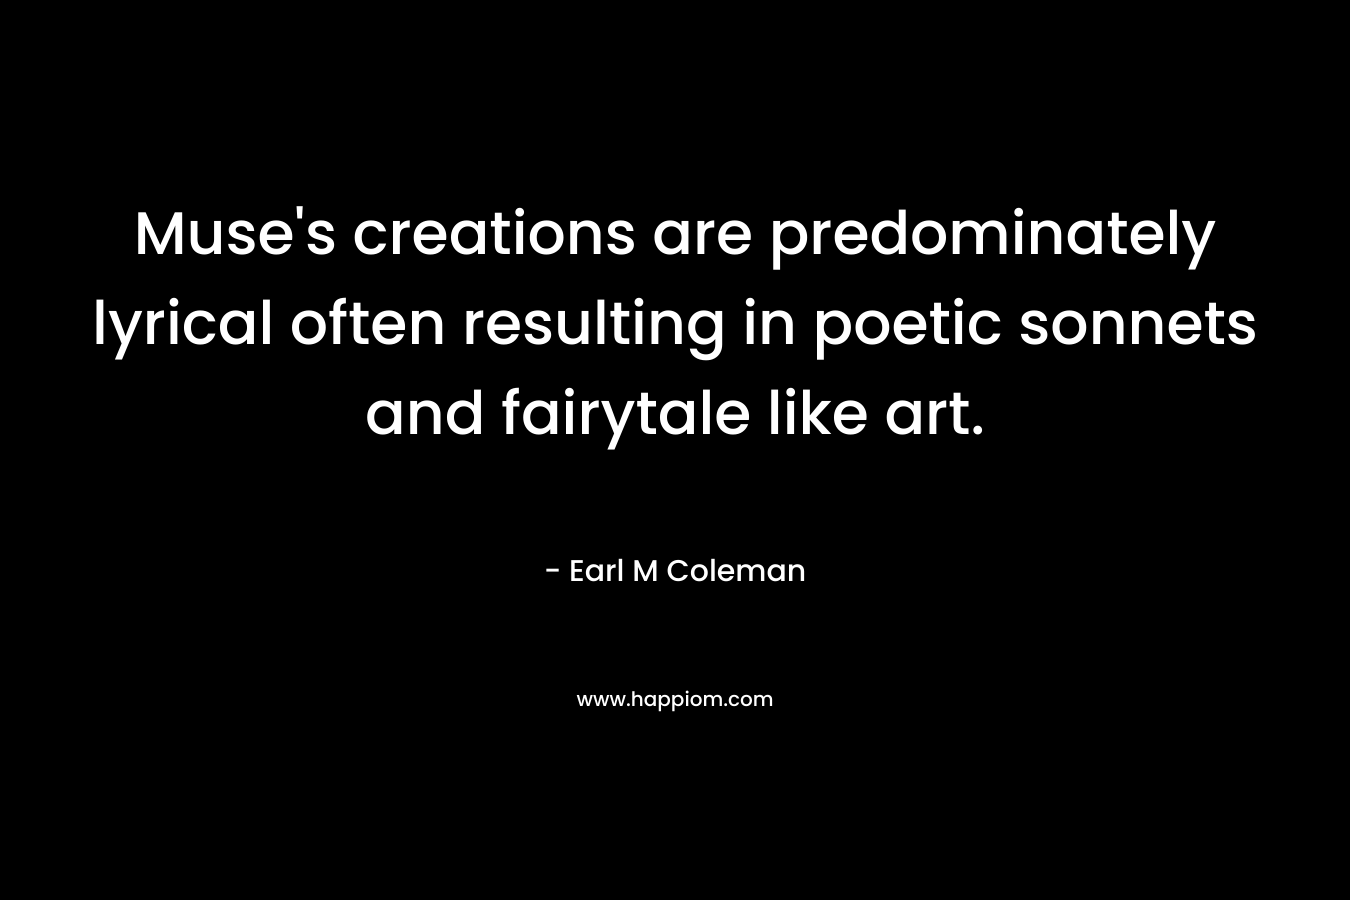 Muse’s creations are predominately lyrical often resulting in poetic sonnets and fairytale like art. – Earl M Coleman